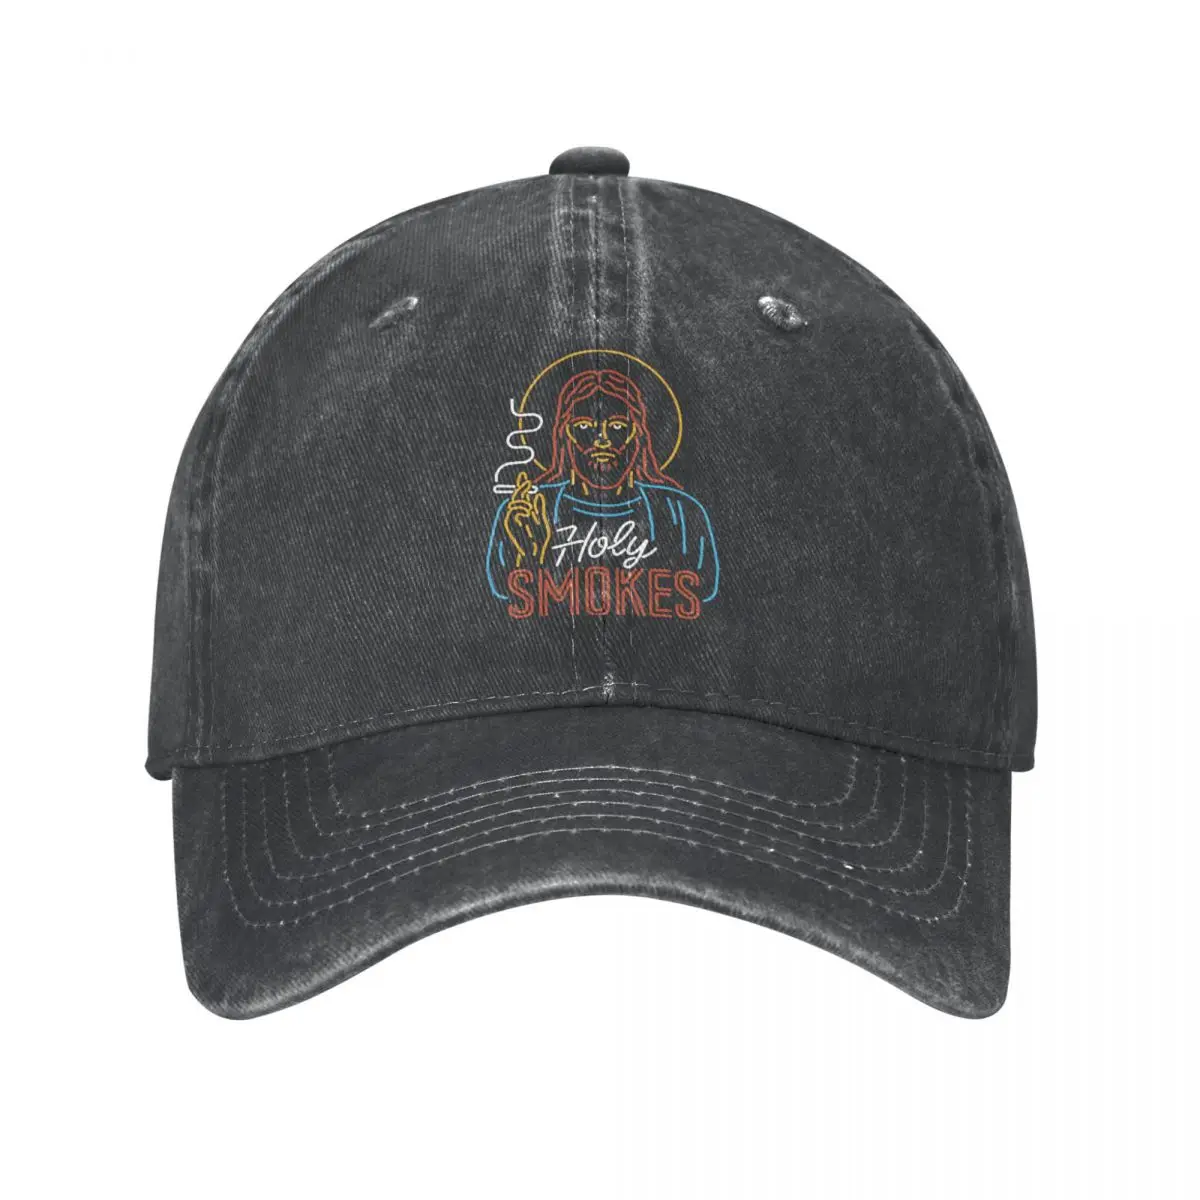 

Jesus Holy Smokes Funny Christian Smoker Humor Stuff Unisex Baseball Cap Distressed Denim Washed Soft Casquette Dad Hat